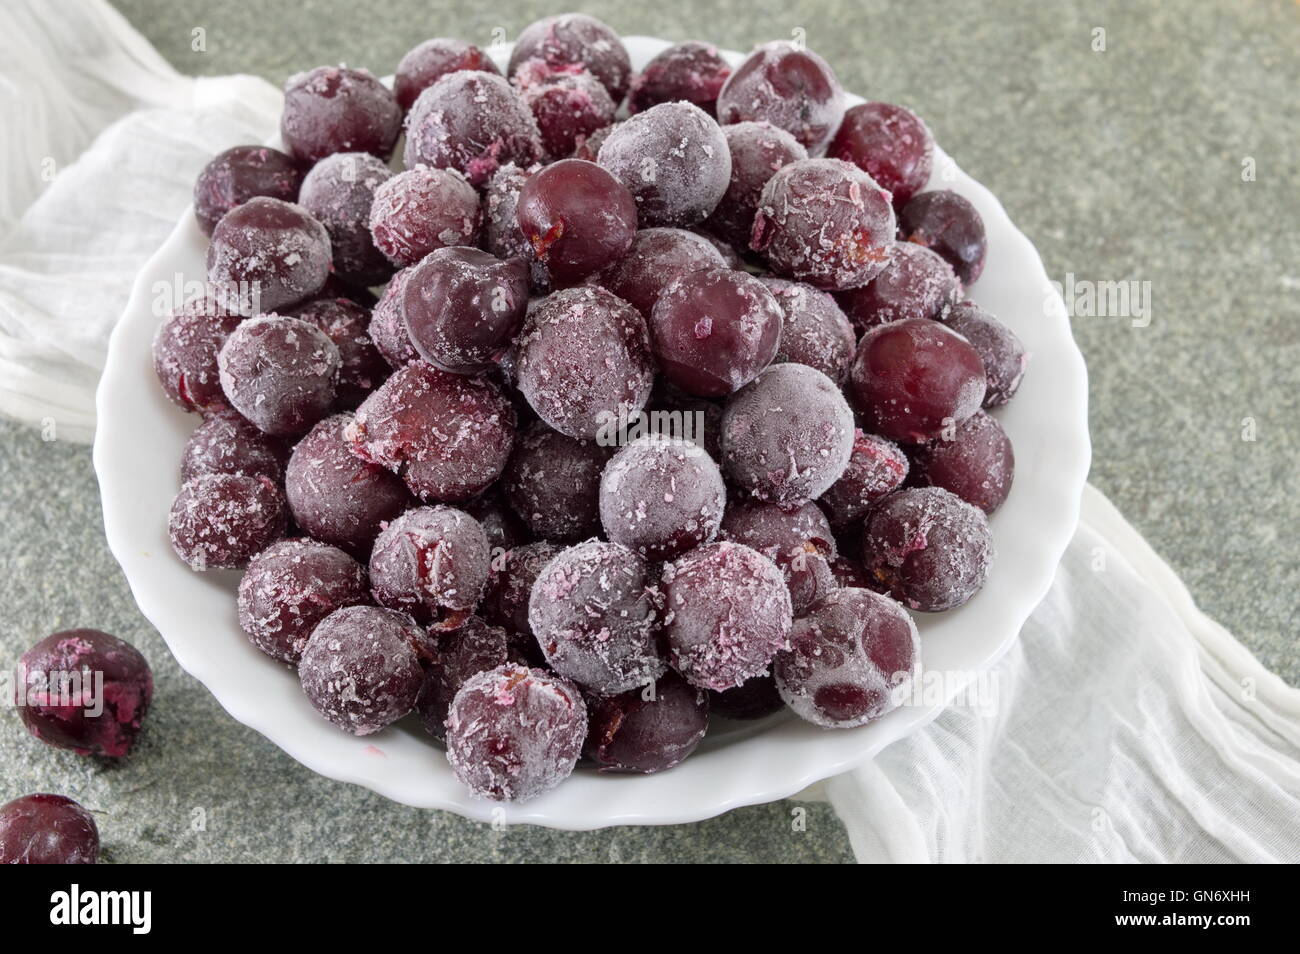 Frozen grapes served in a white bowl Stock Photo